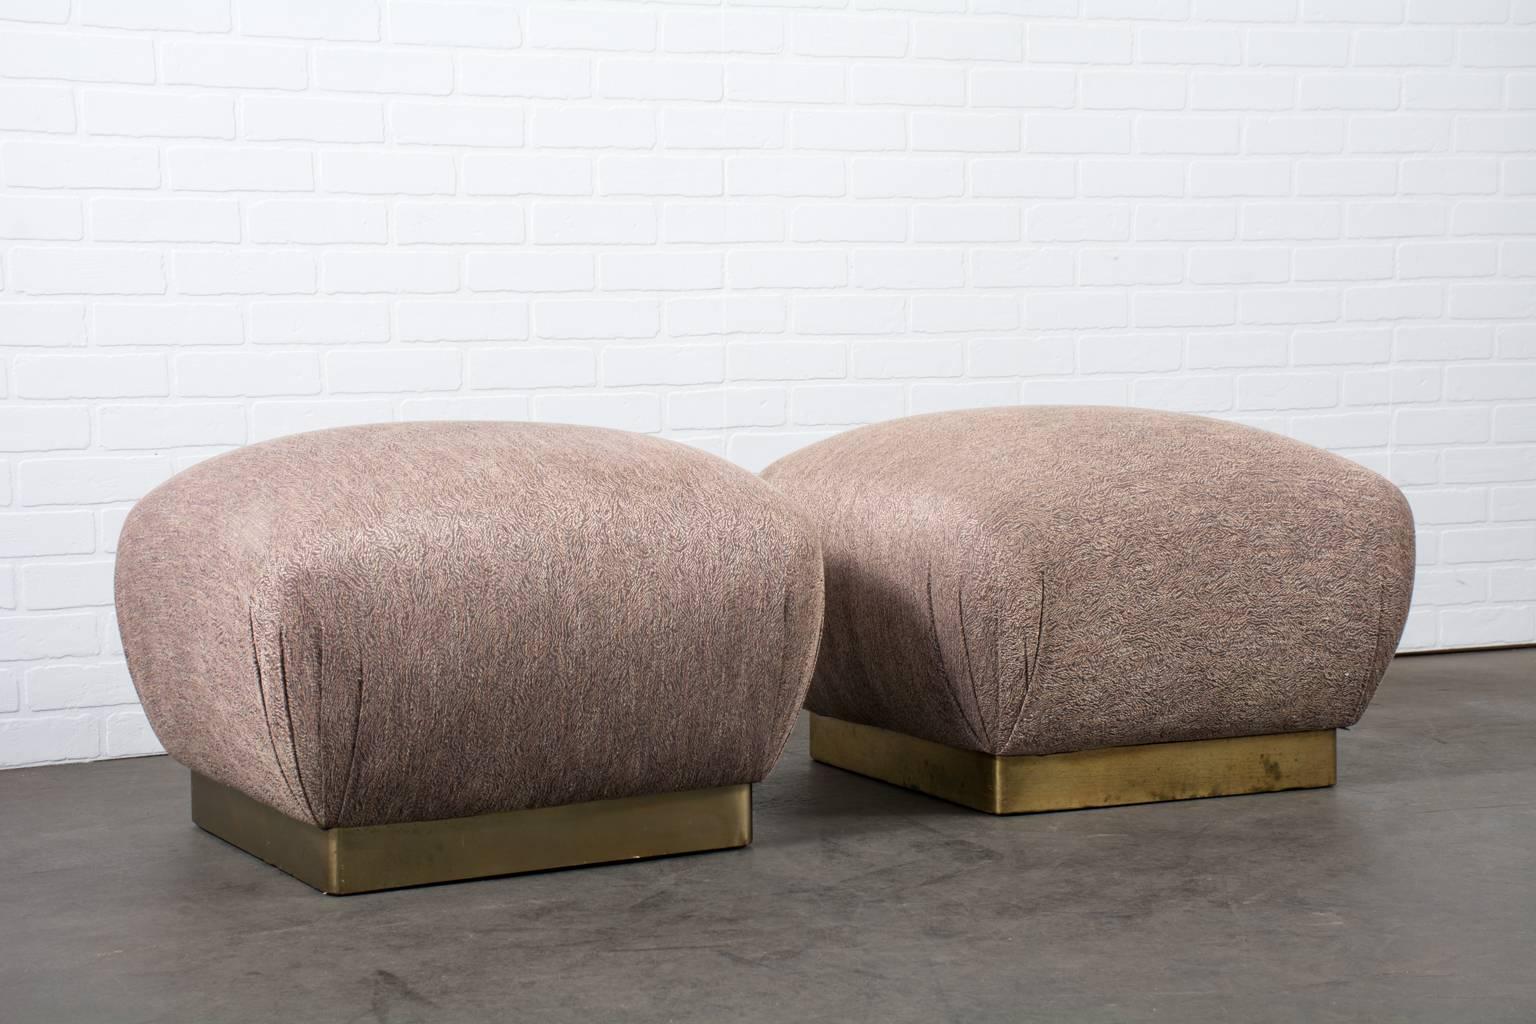 This is a pair of vintage ottomans by Marge Carson with the original upholstery.